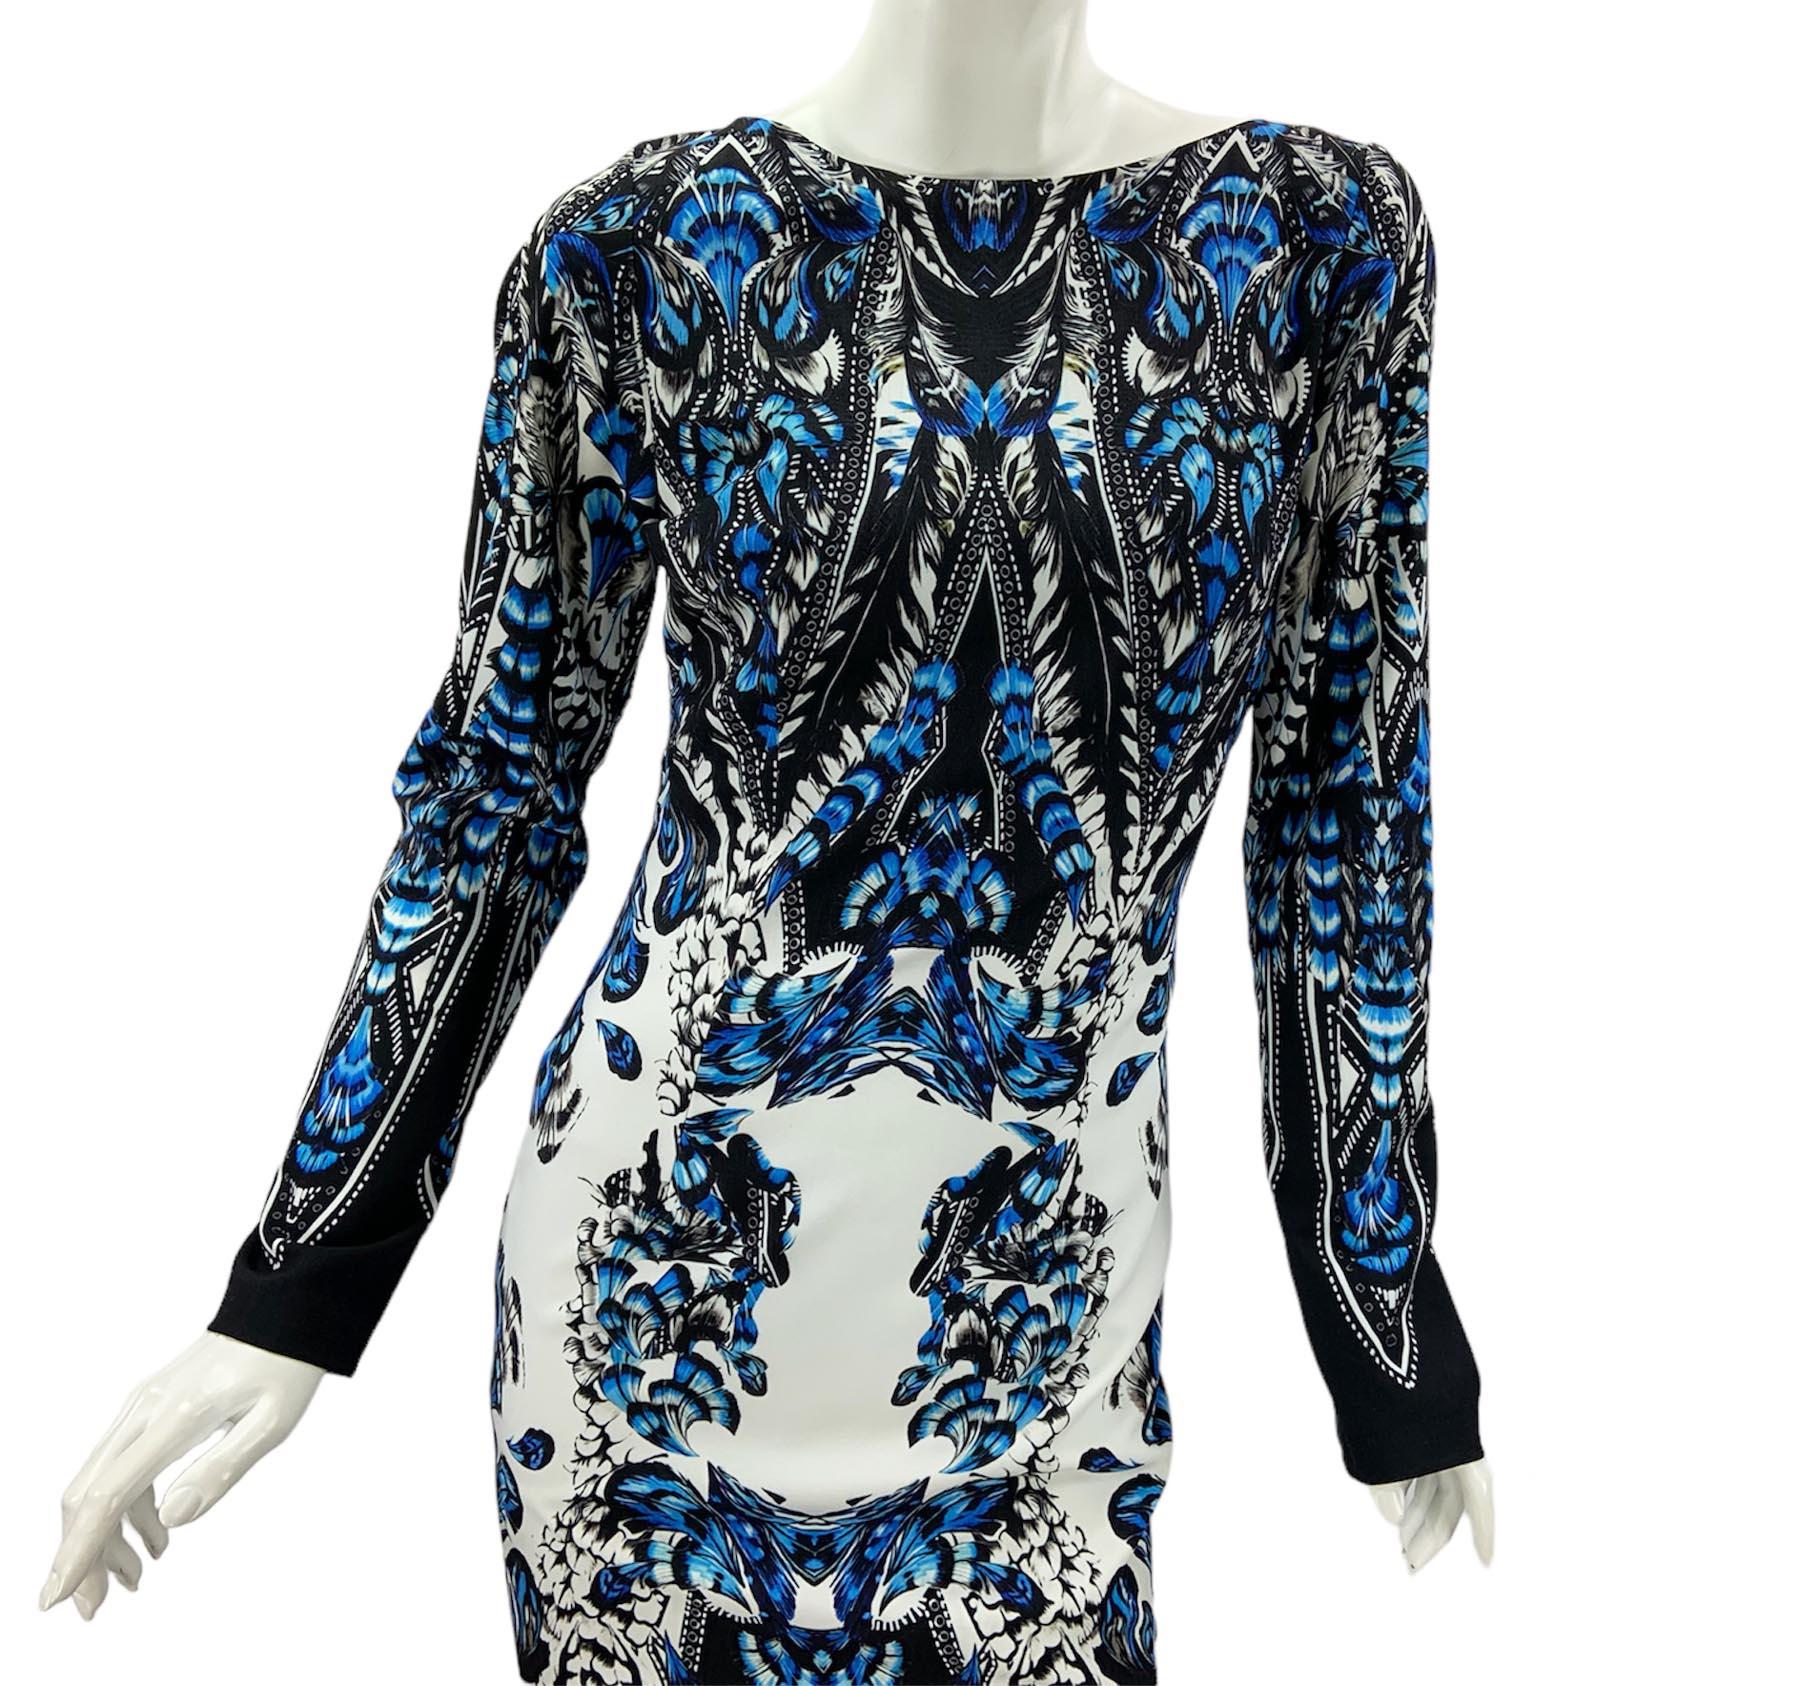 New Roberto Cavalli Feather Print Blue White Dress Gown Italian 36 For Sale 2